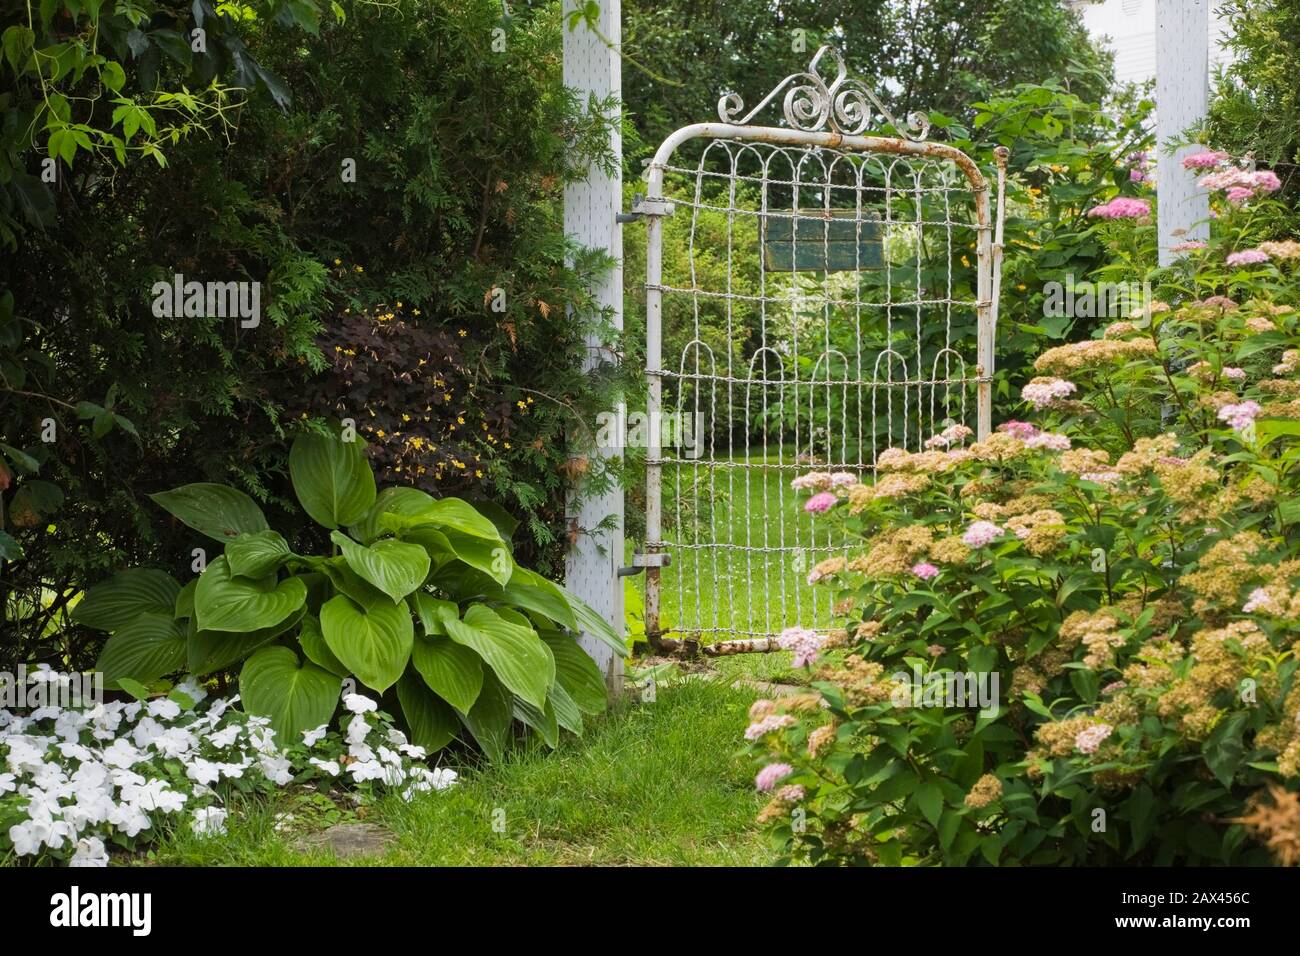 White rusted metal fence gate flanked by Thuja occidentalis - Cedar trees, Hosta plants and pink Spiraea japonica ' Gold Mound' - Spirea shrub Stock Photo